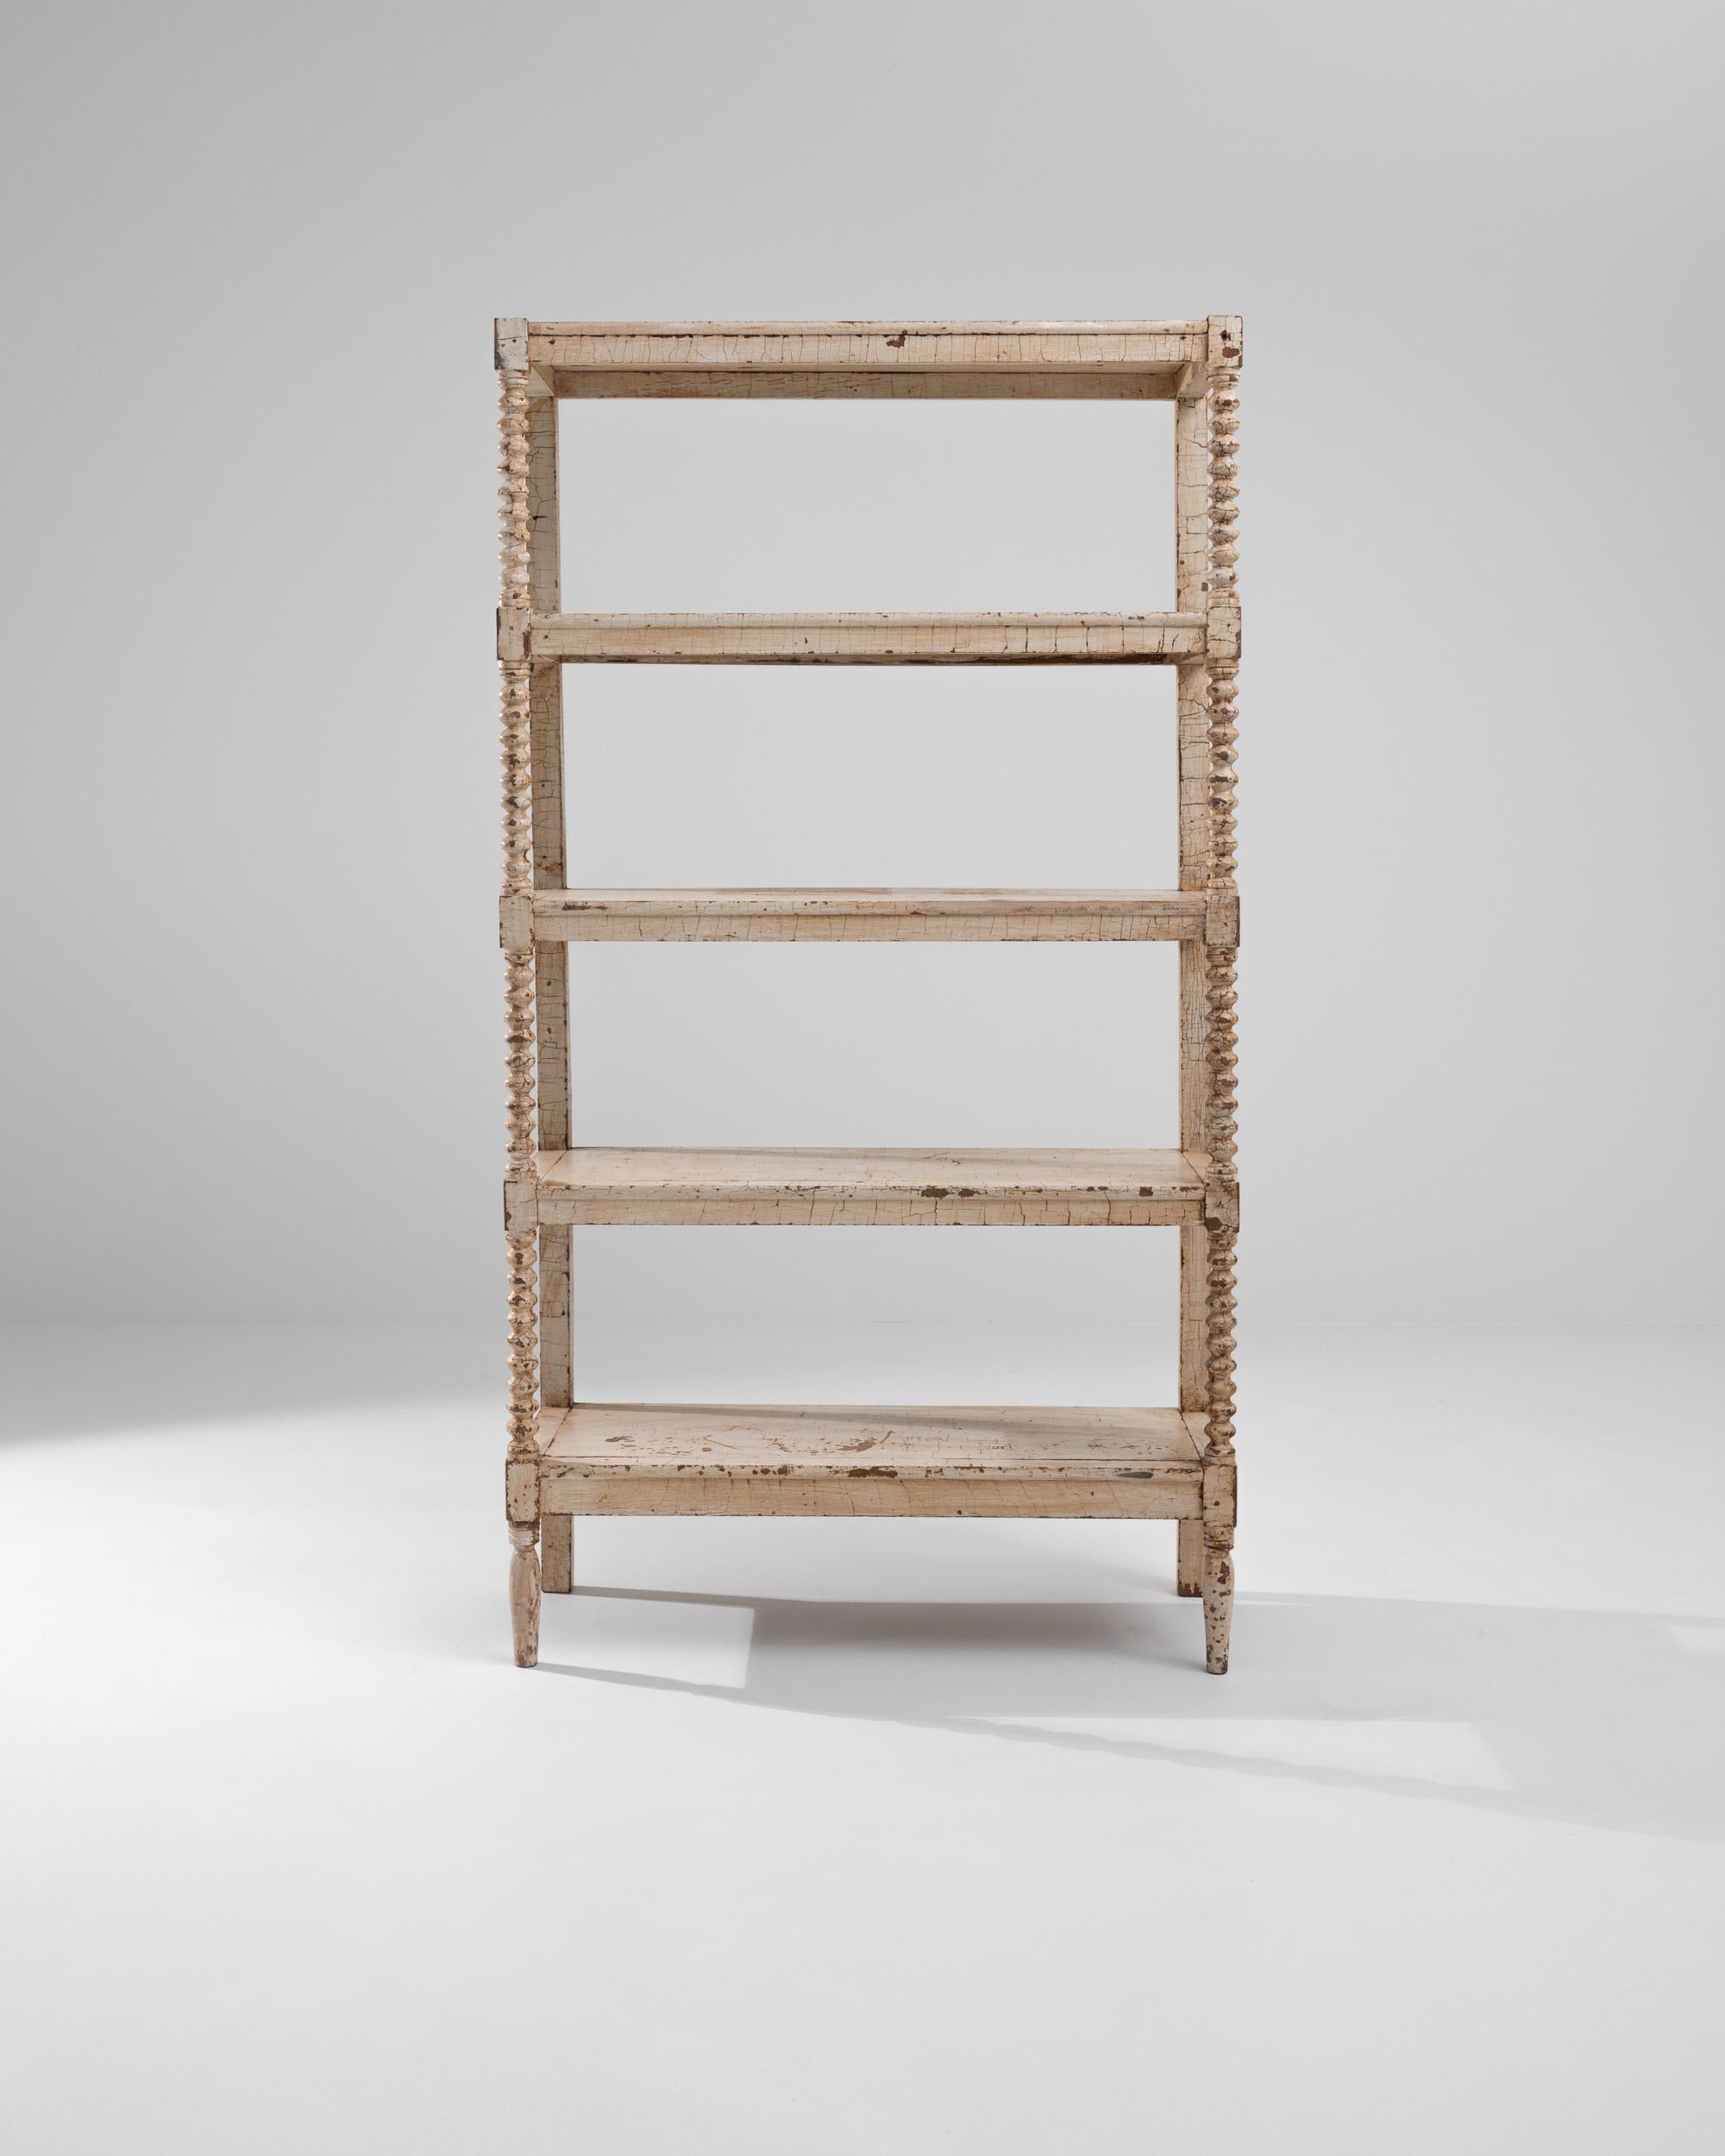 These antique wooden shelves were produced in France, circa 1900. A beautiful wooden five-shelf unit standing on ring turned tapered feet, this twisted piece elevates slightly under six feet and provides for a spacious display surface. The playfully